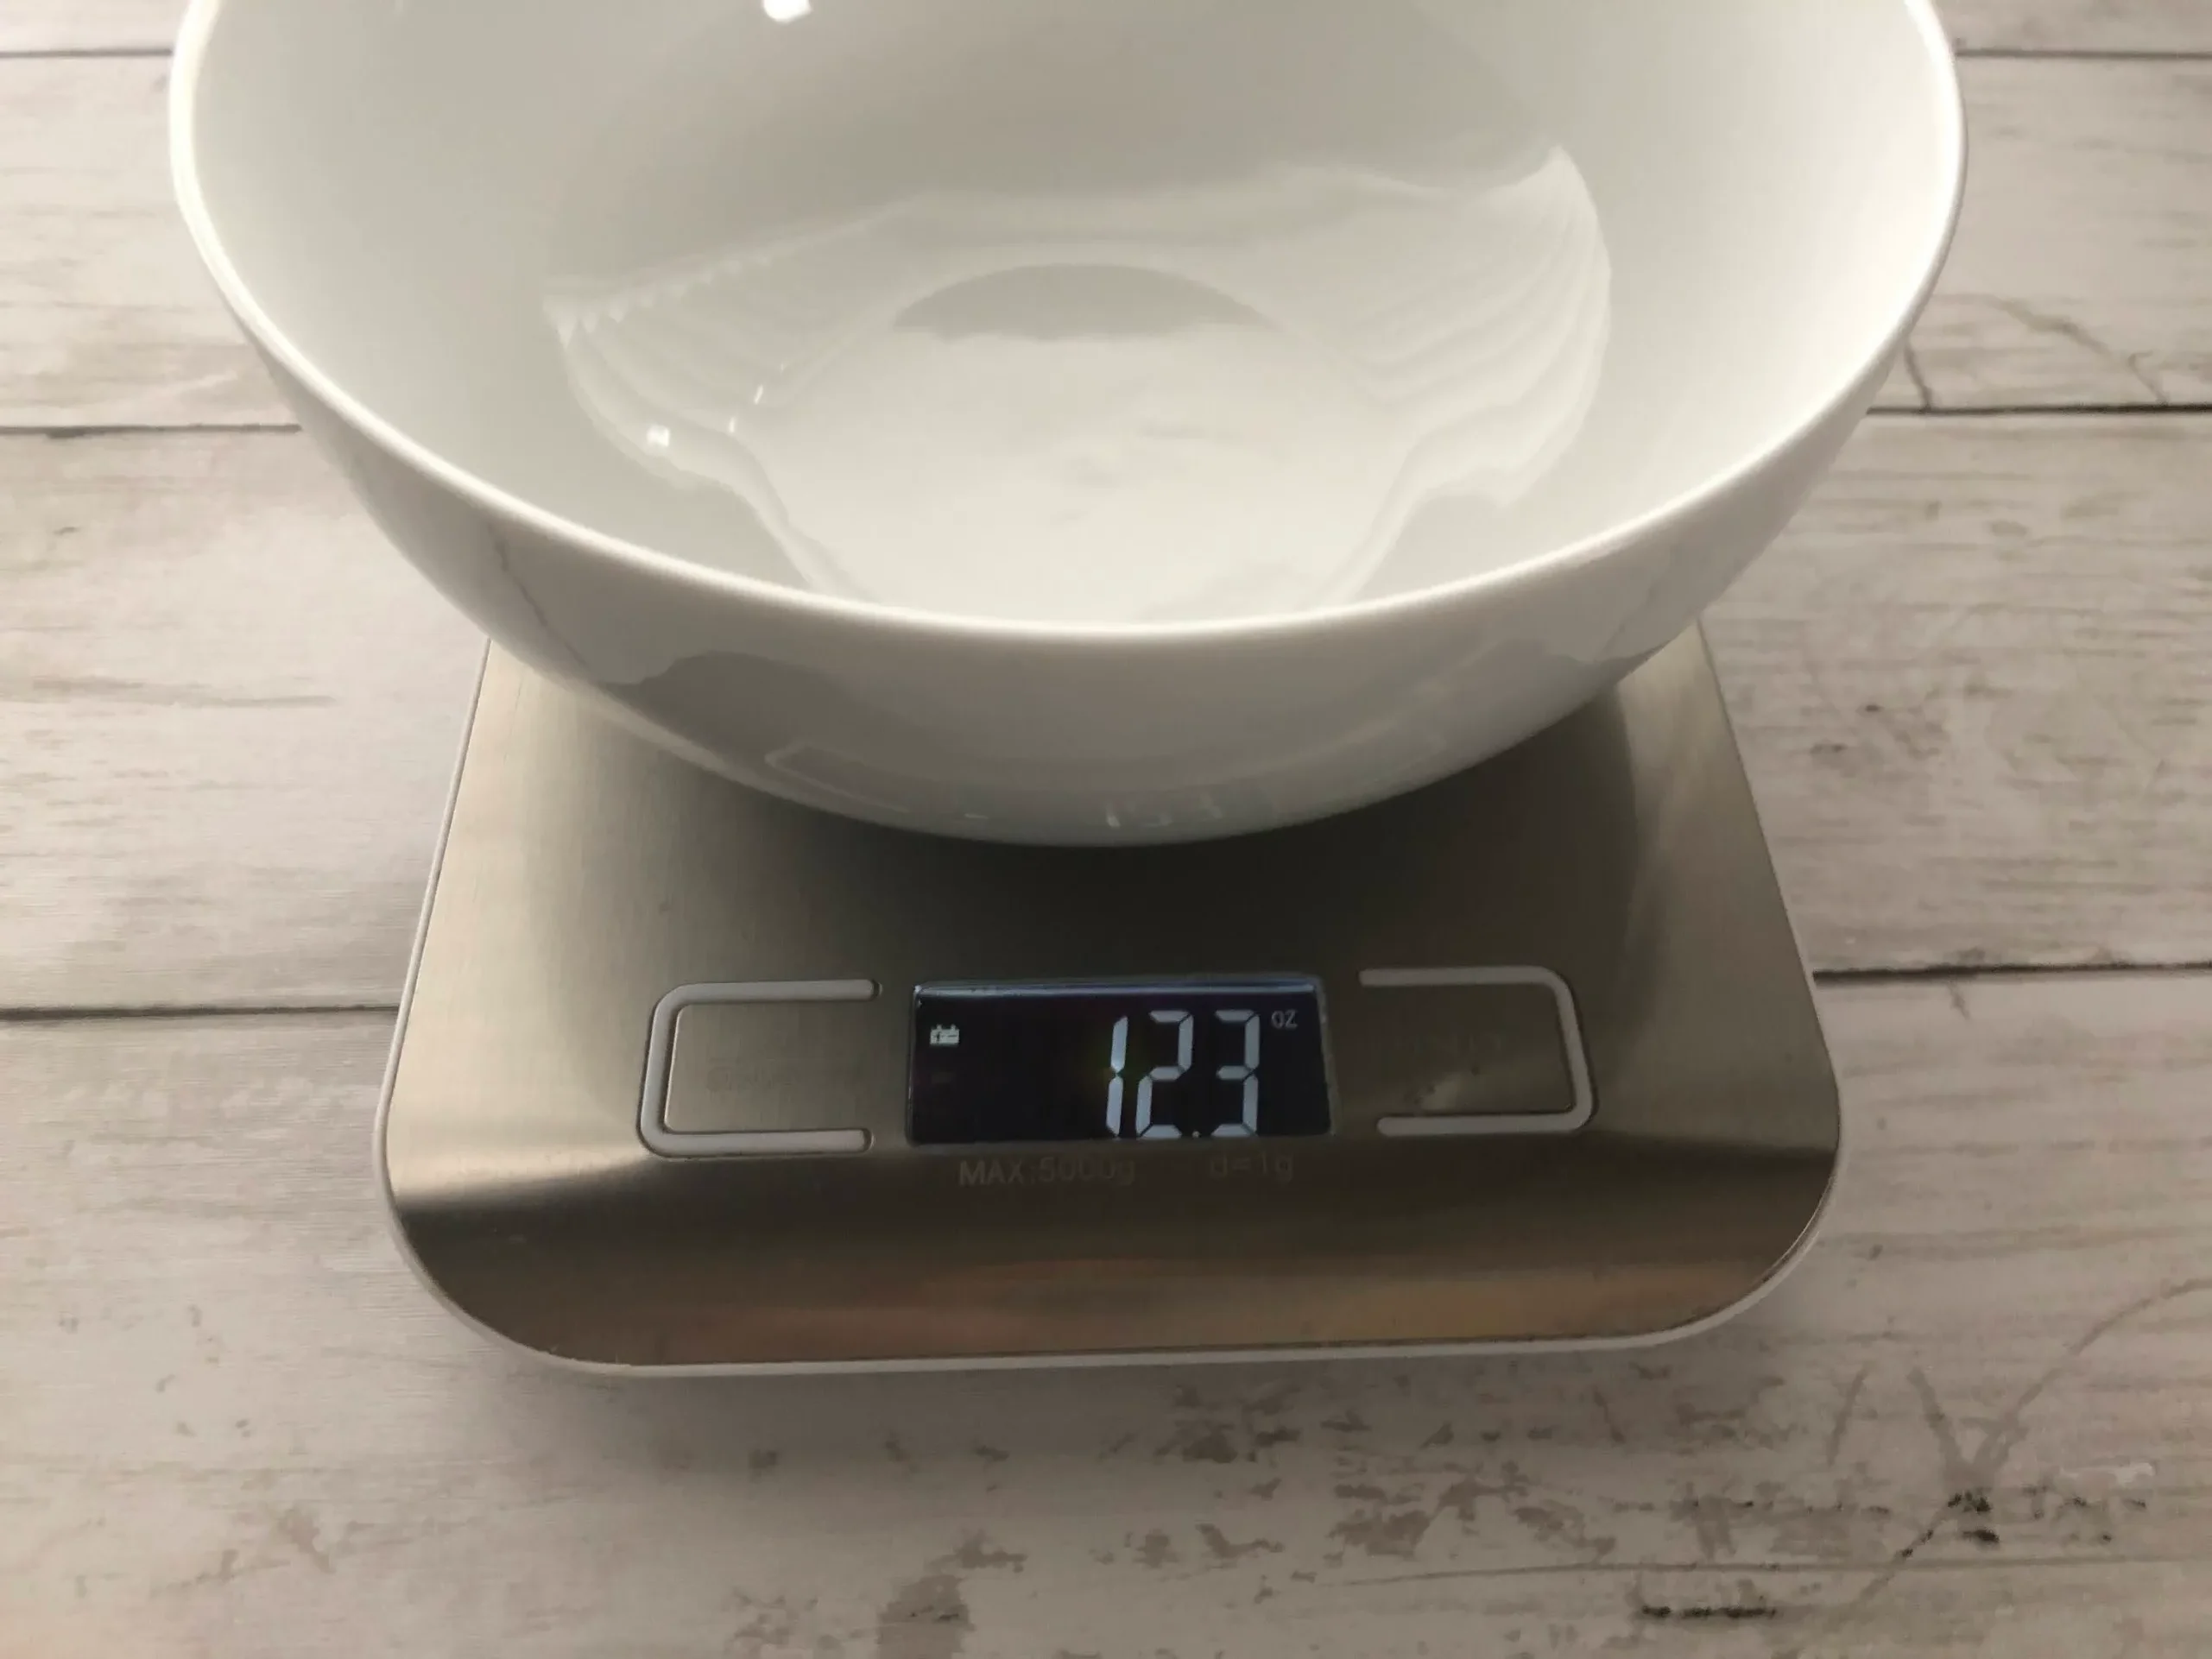 bowl on scale